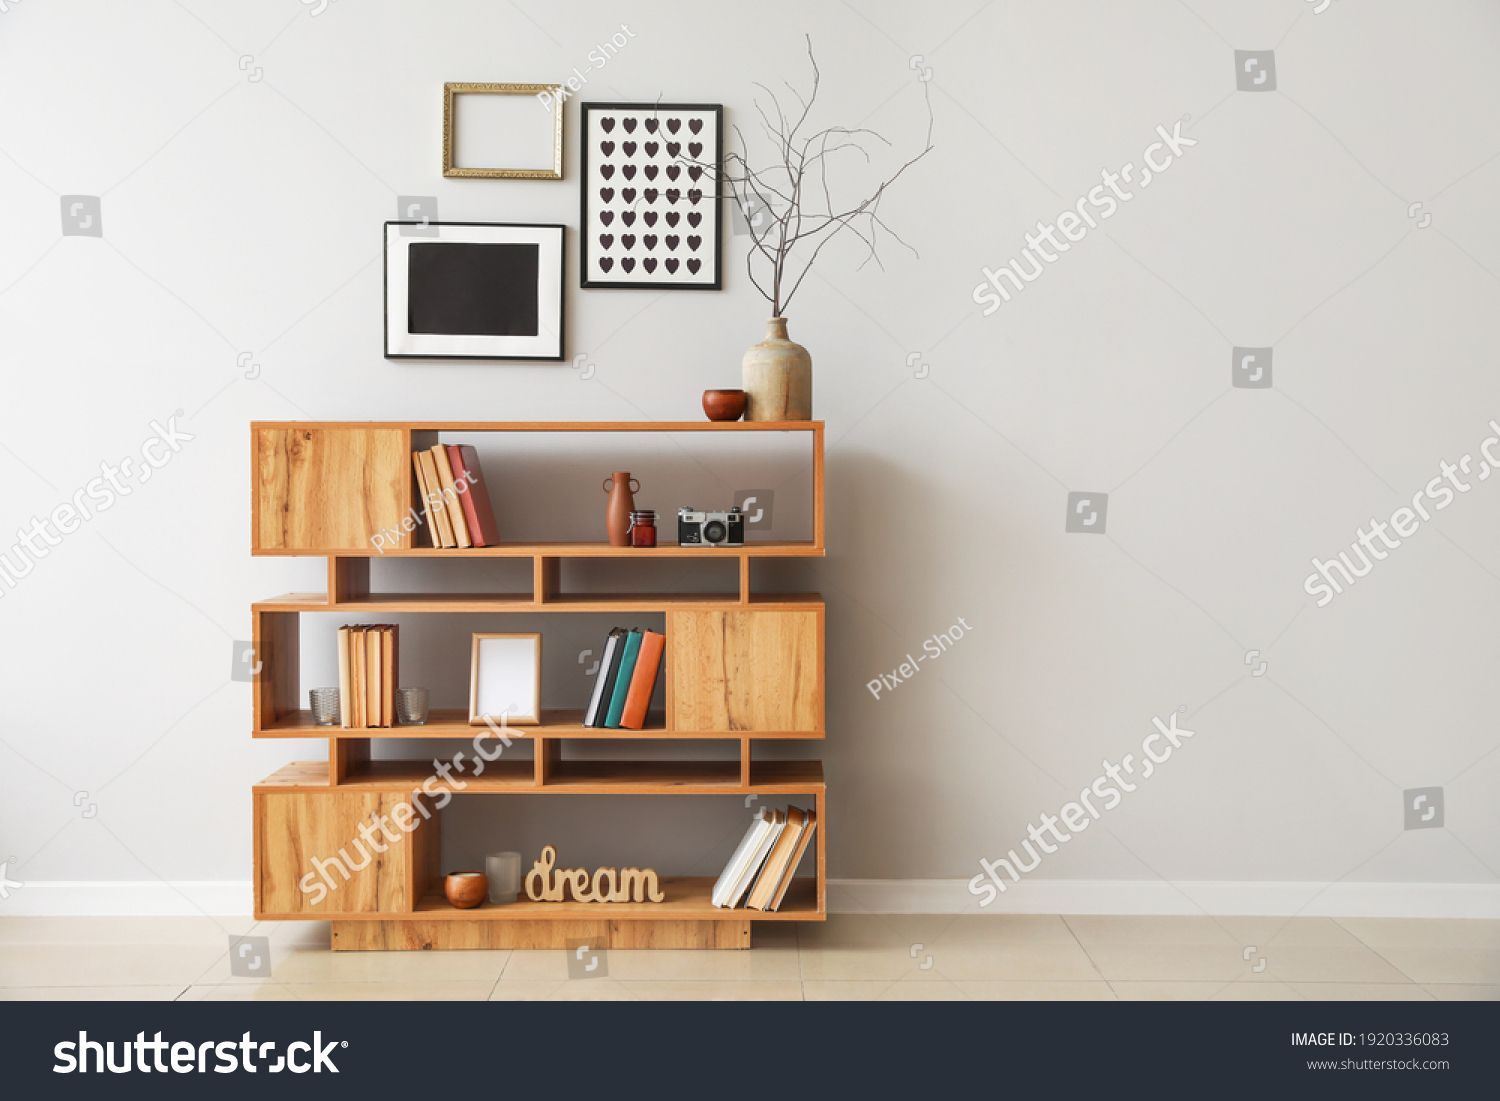 Shelving unit with books and decor in interior of room #1920336083